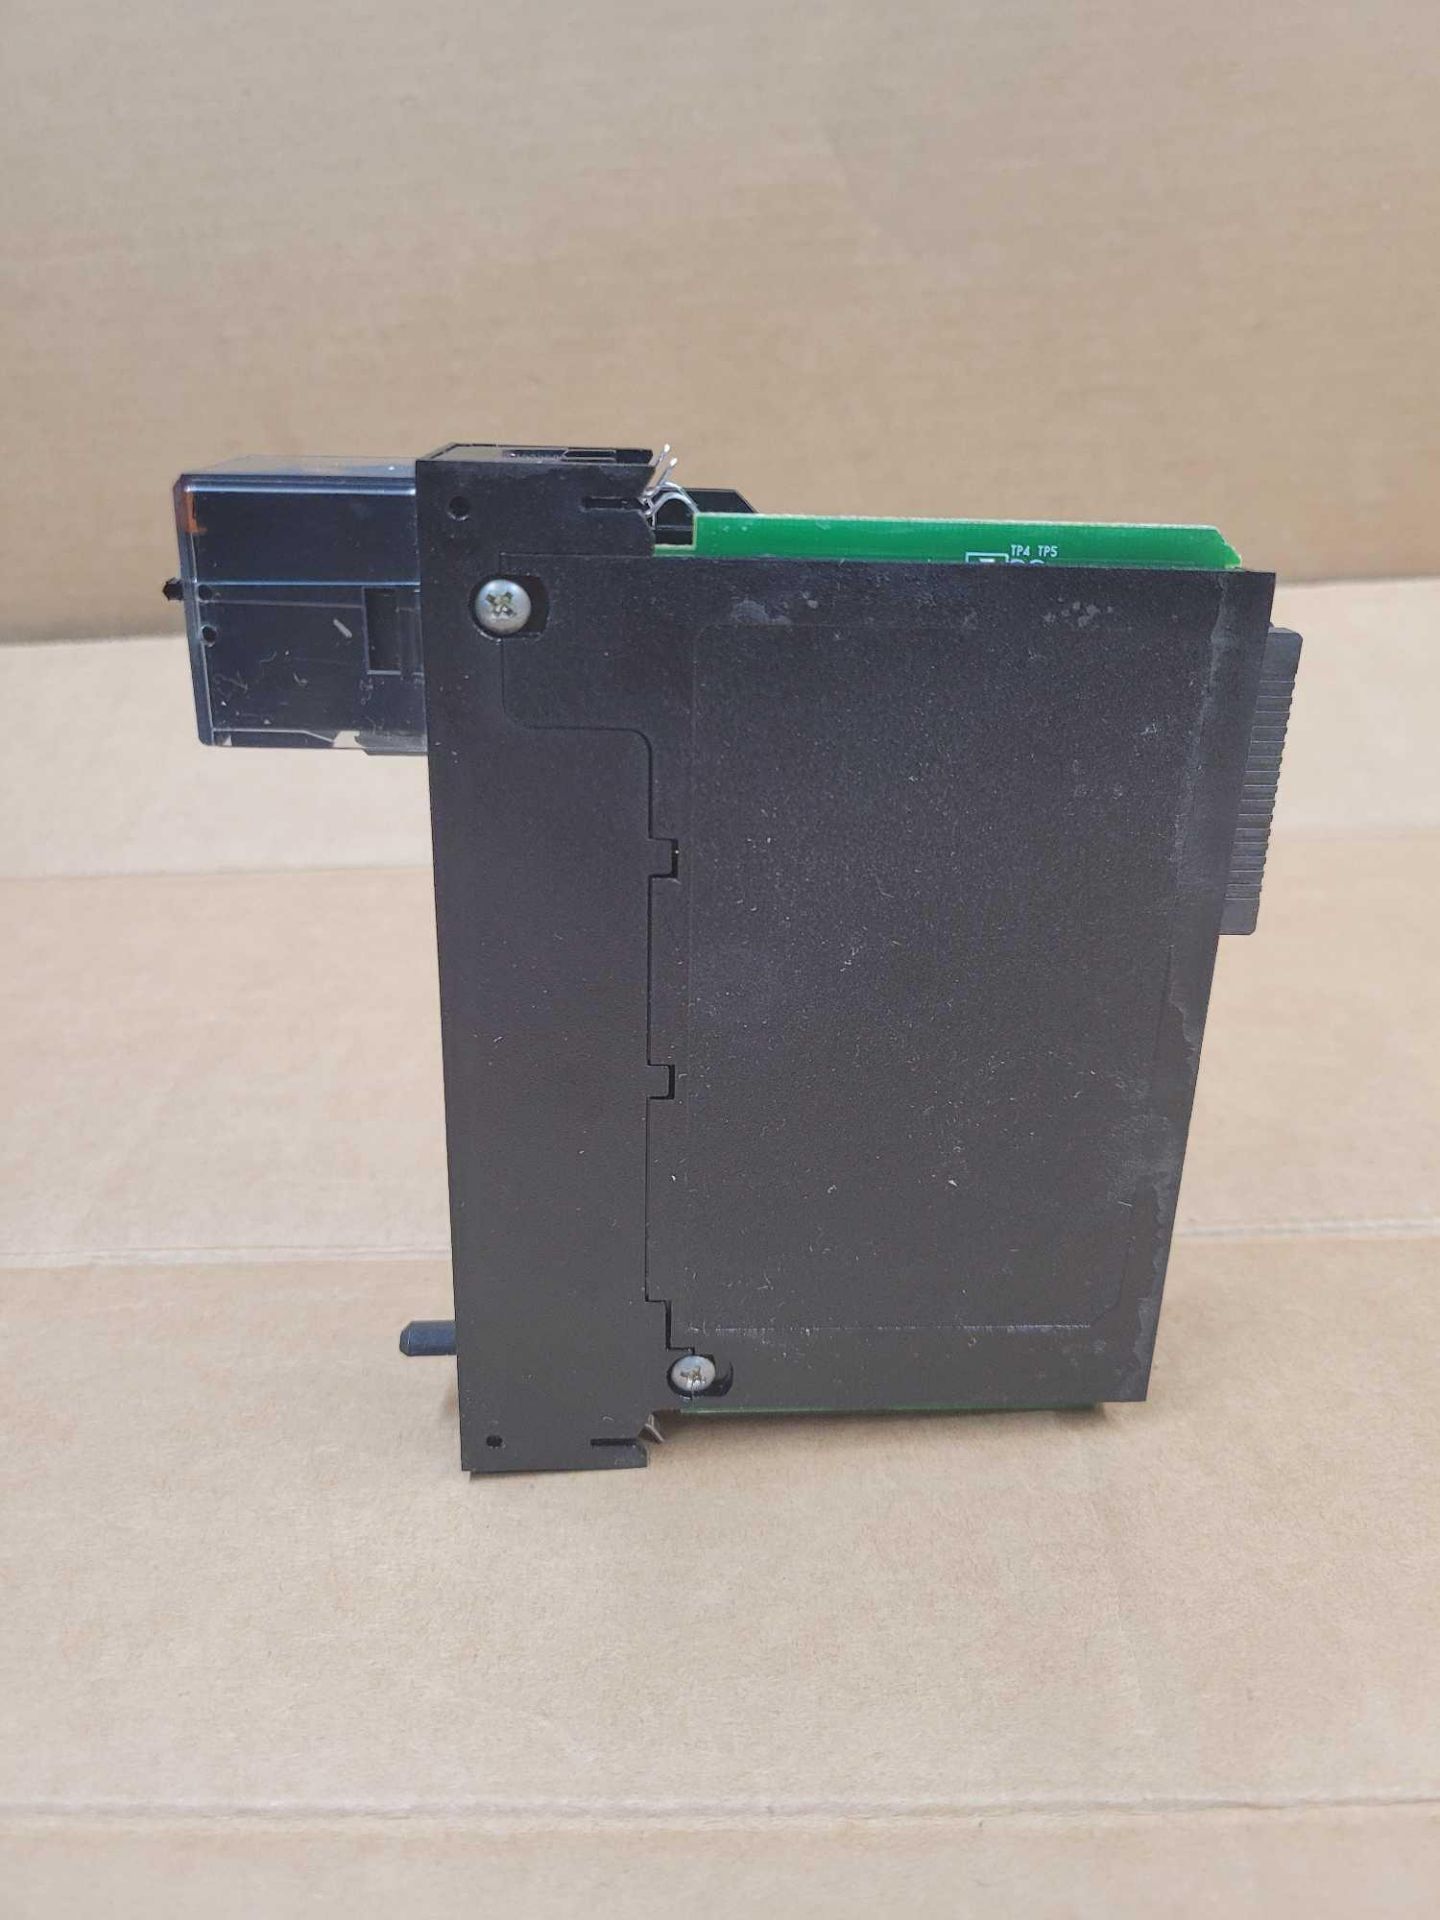 ALLEN BRADLEY 1756-OW16I / Series A Isolated Relay Output Module  /  Lot Weight: 0.6 lbs - Image 2 of 6